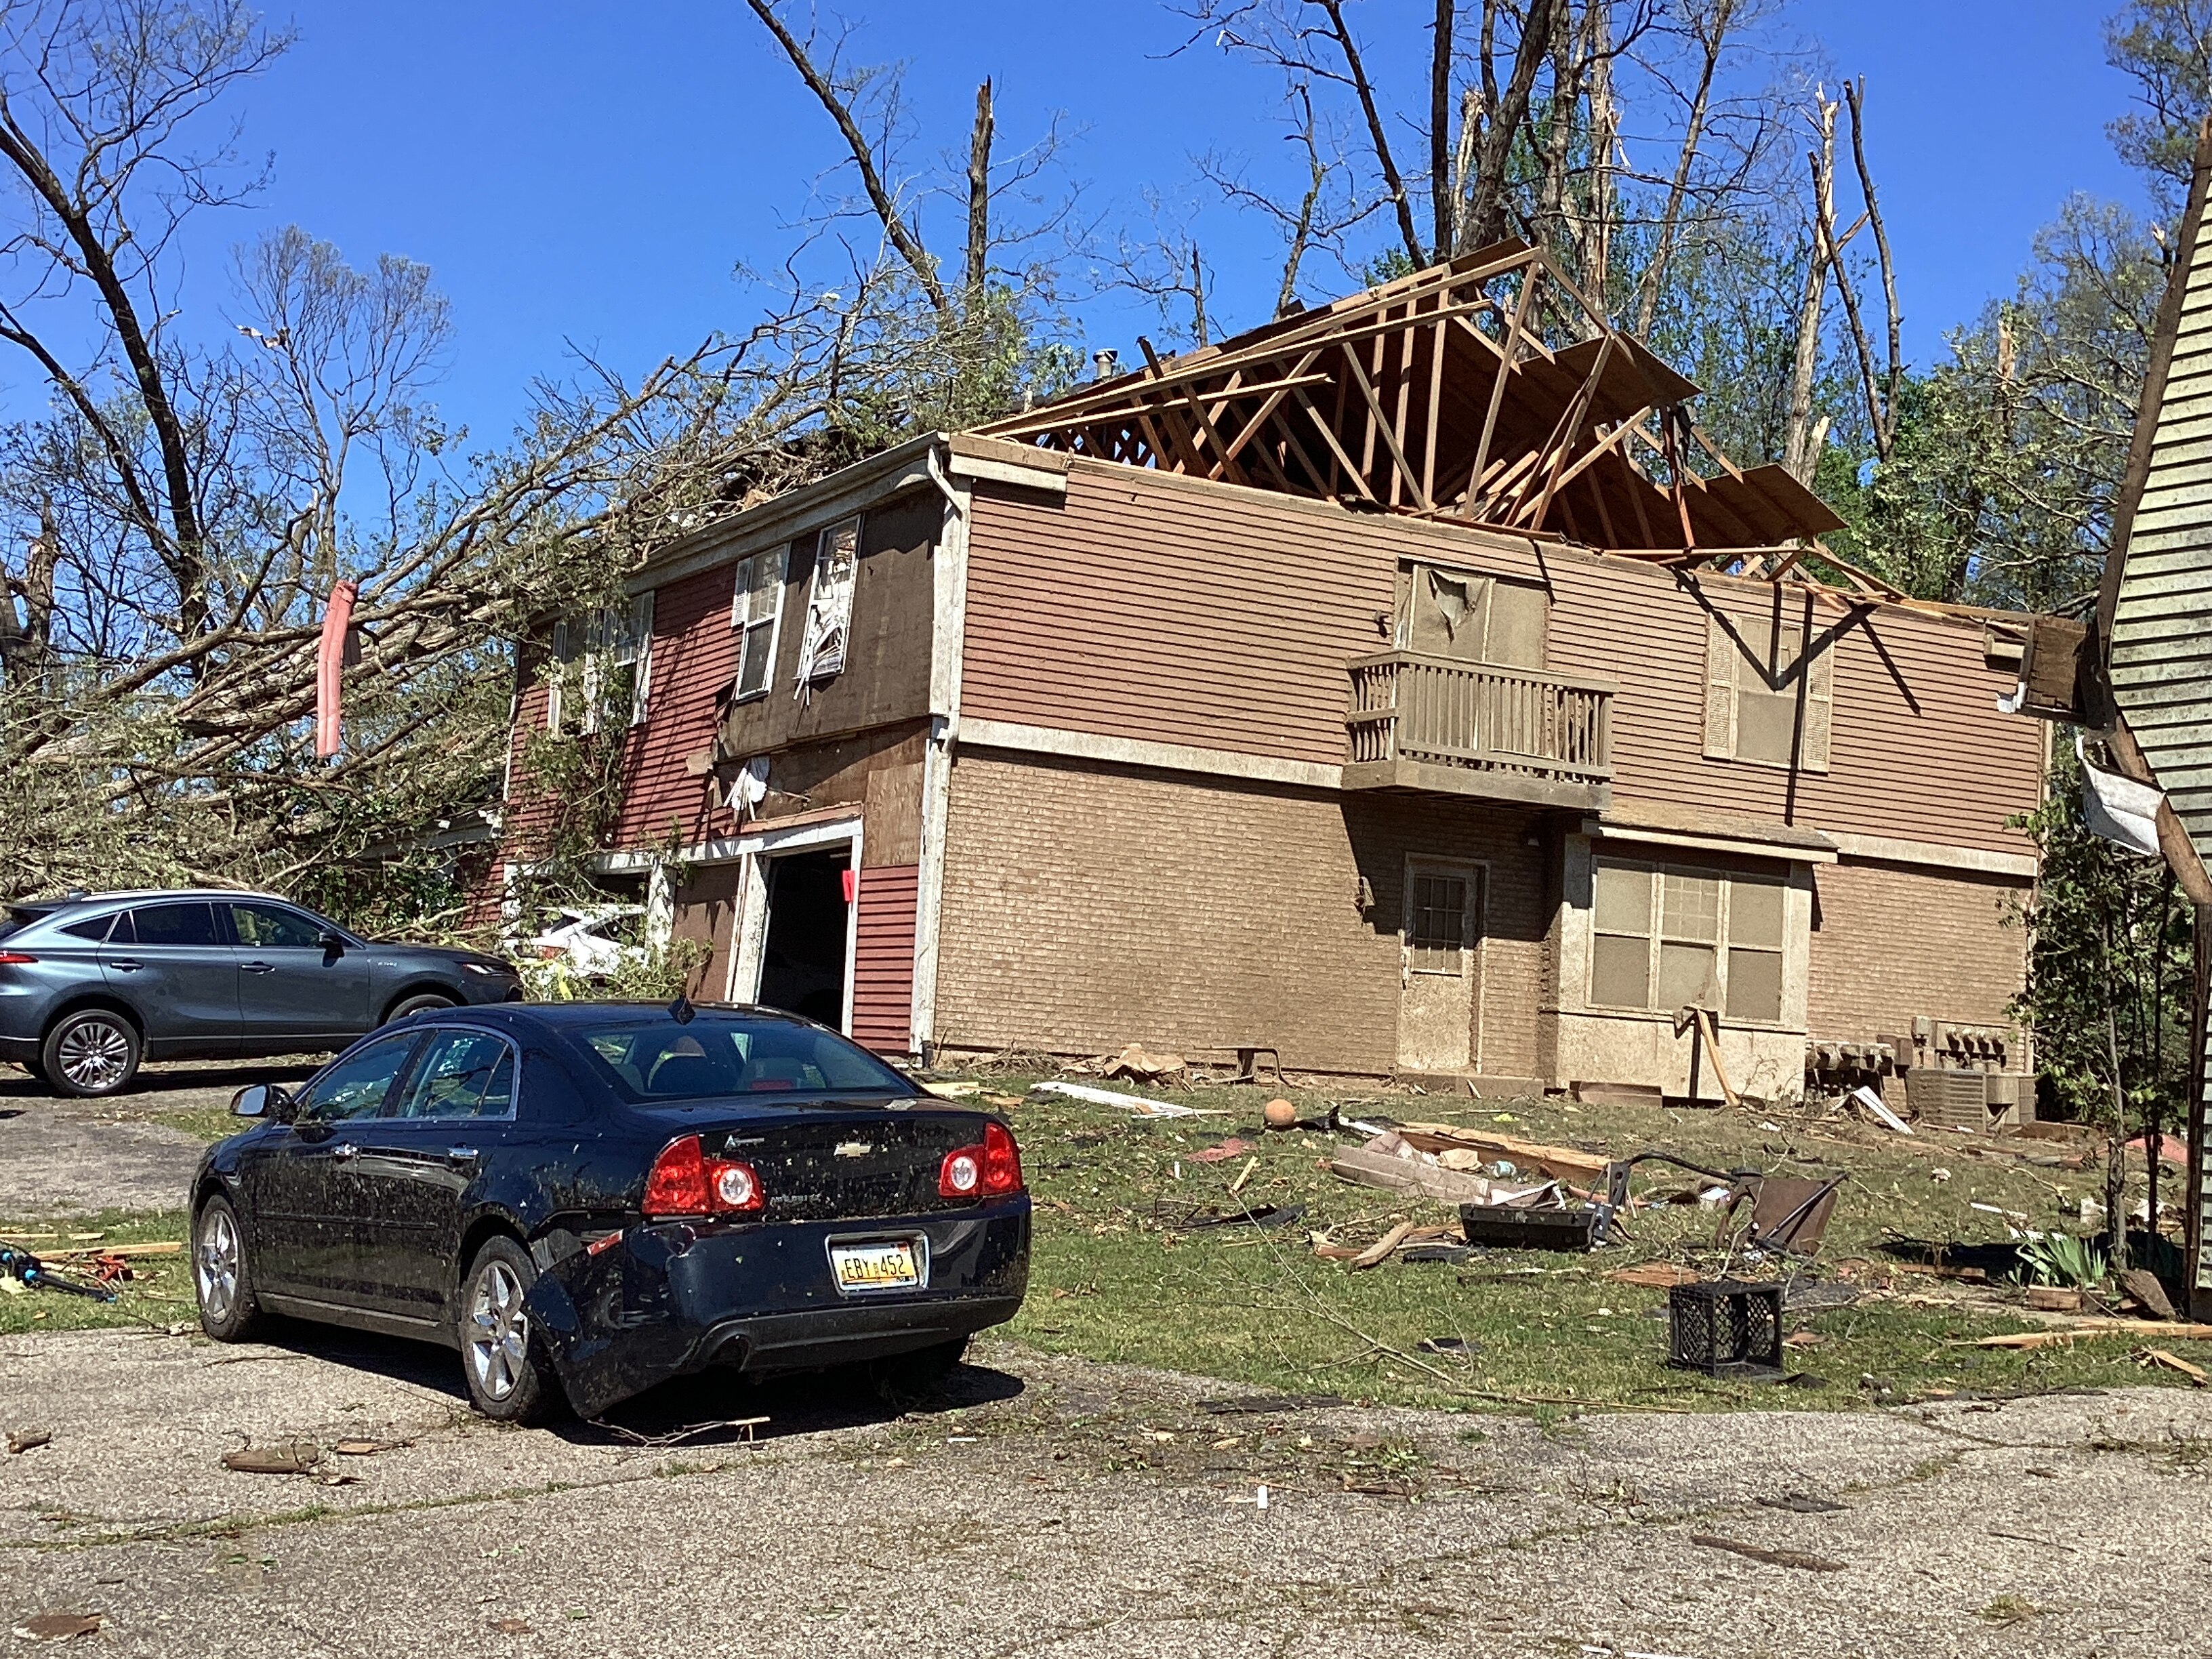 High-end EF2 damage at an apartment complex in Portage, Michigan.